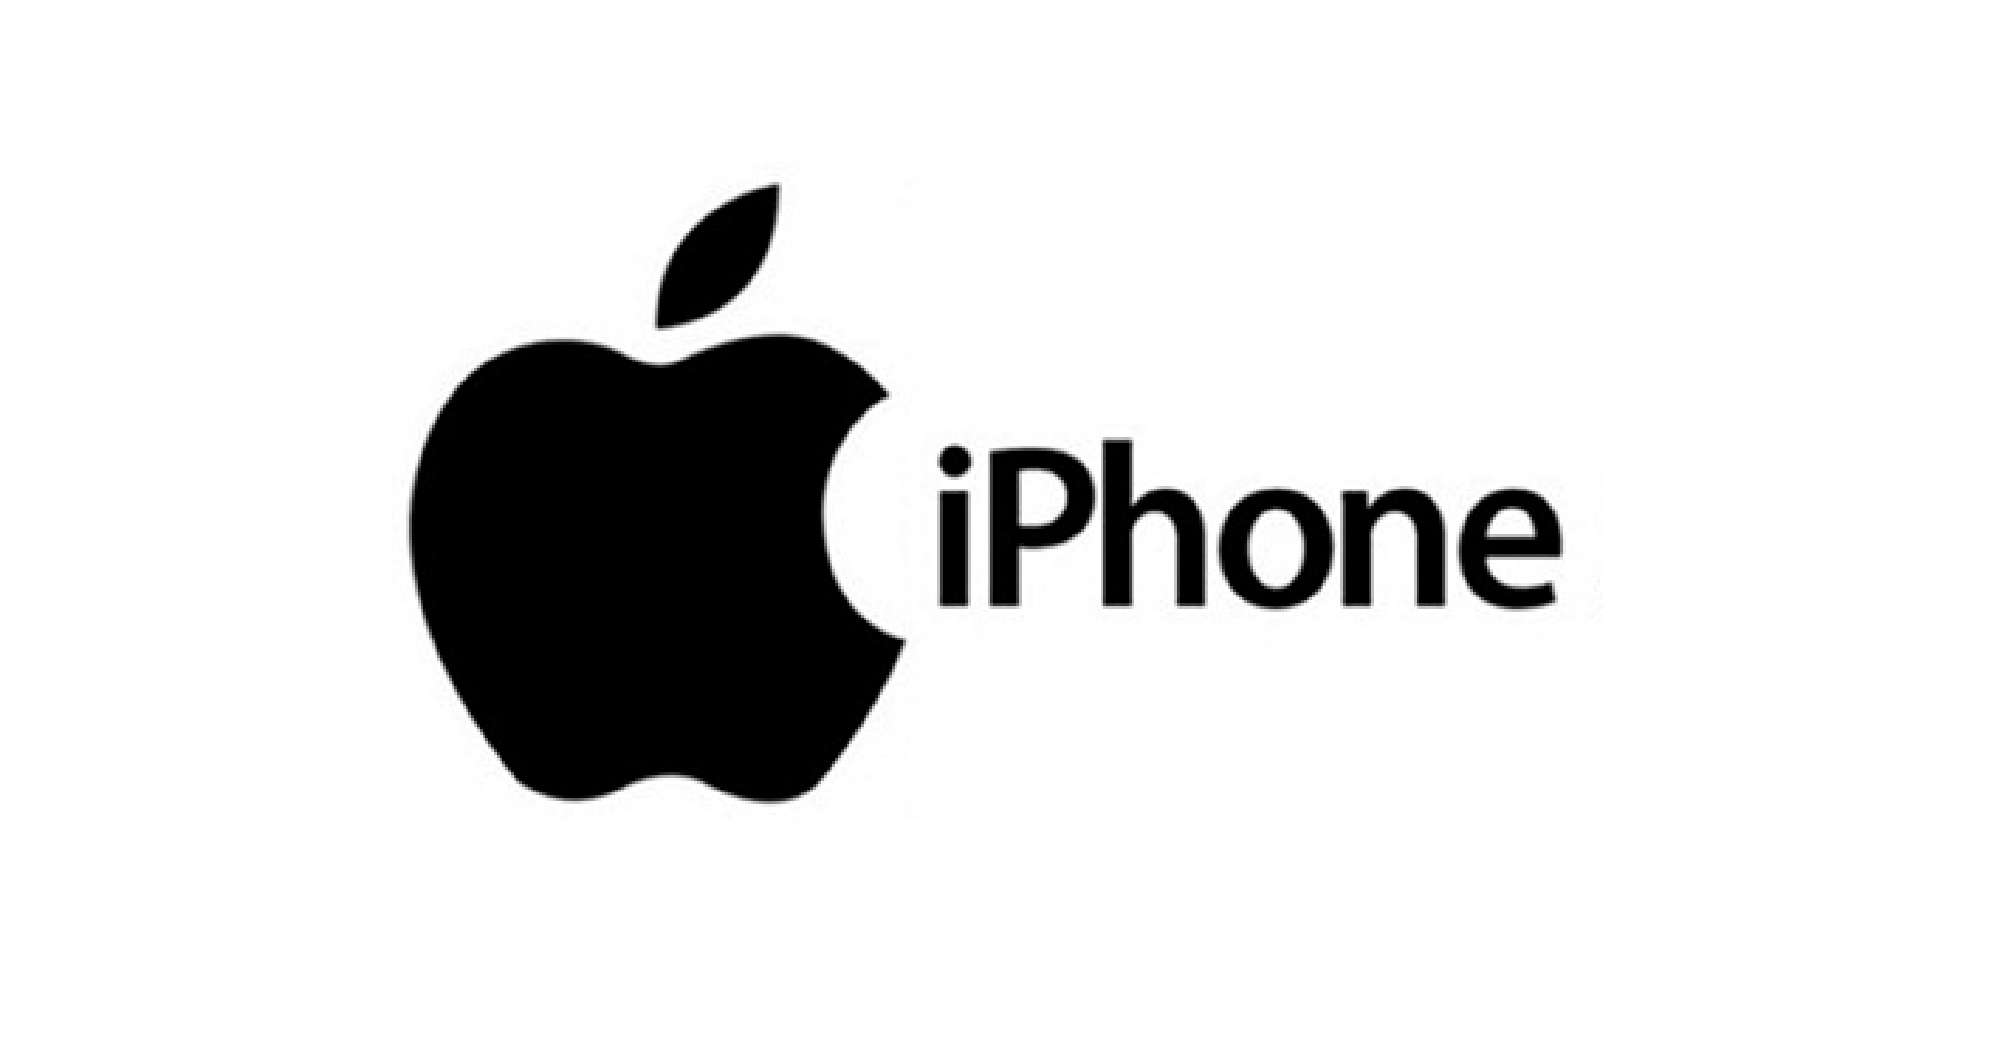 Apple iPhone Logo - Pin by print misr on Png in 2019 | Iphone, Iphone logo, Apple